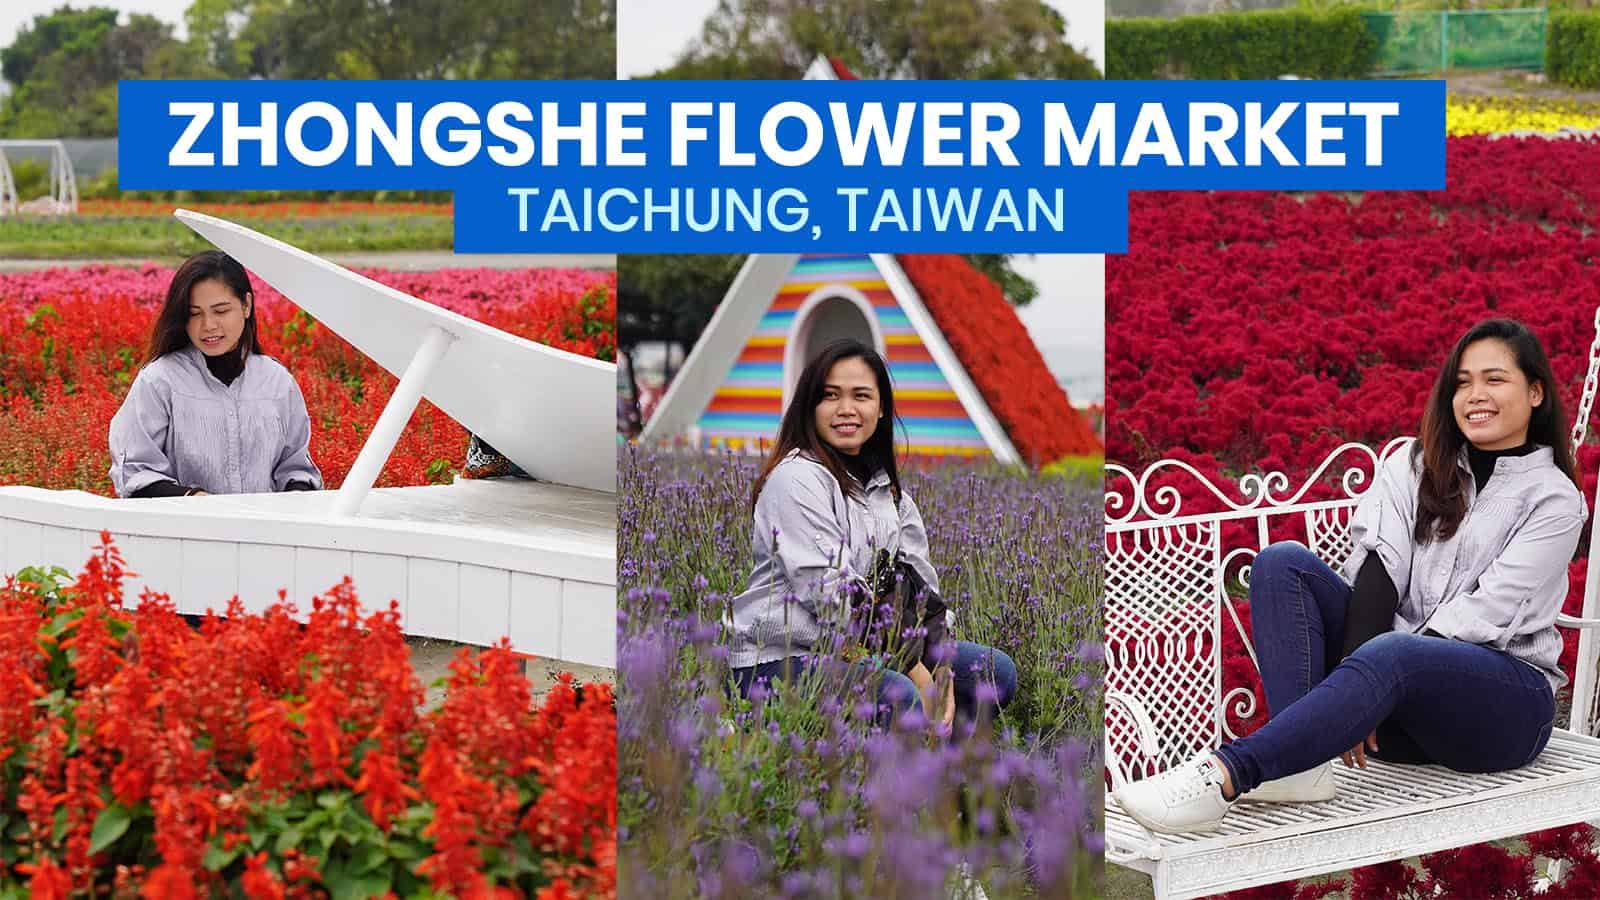 ZHONGSHE / CHUNGSHE FLOWER MARKET: Travel Guide + How to Get There (Taichung, Taiwan)